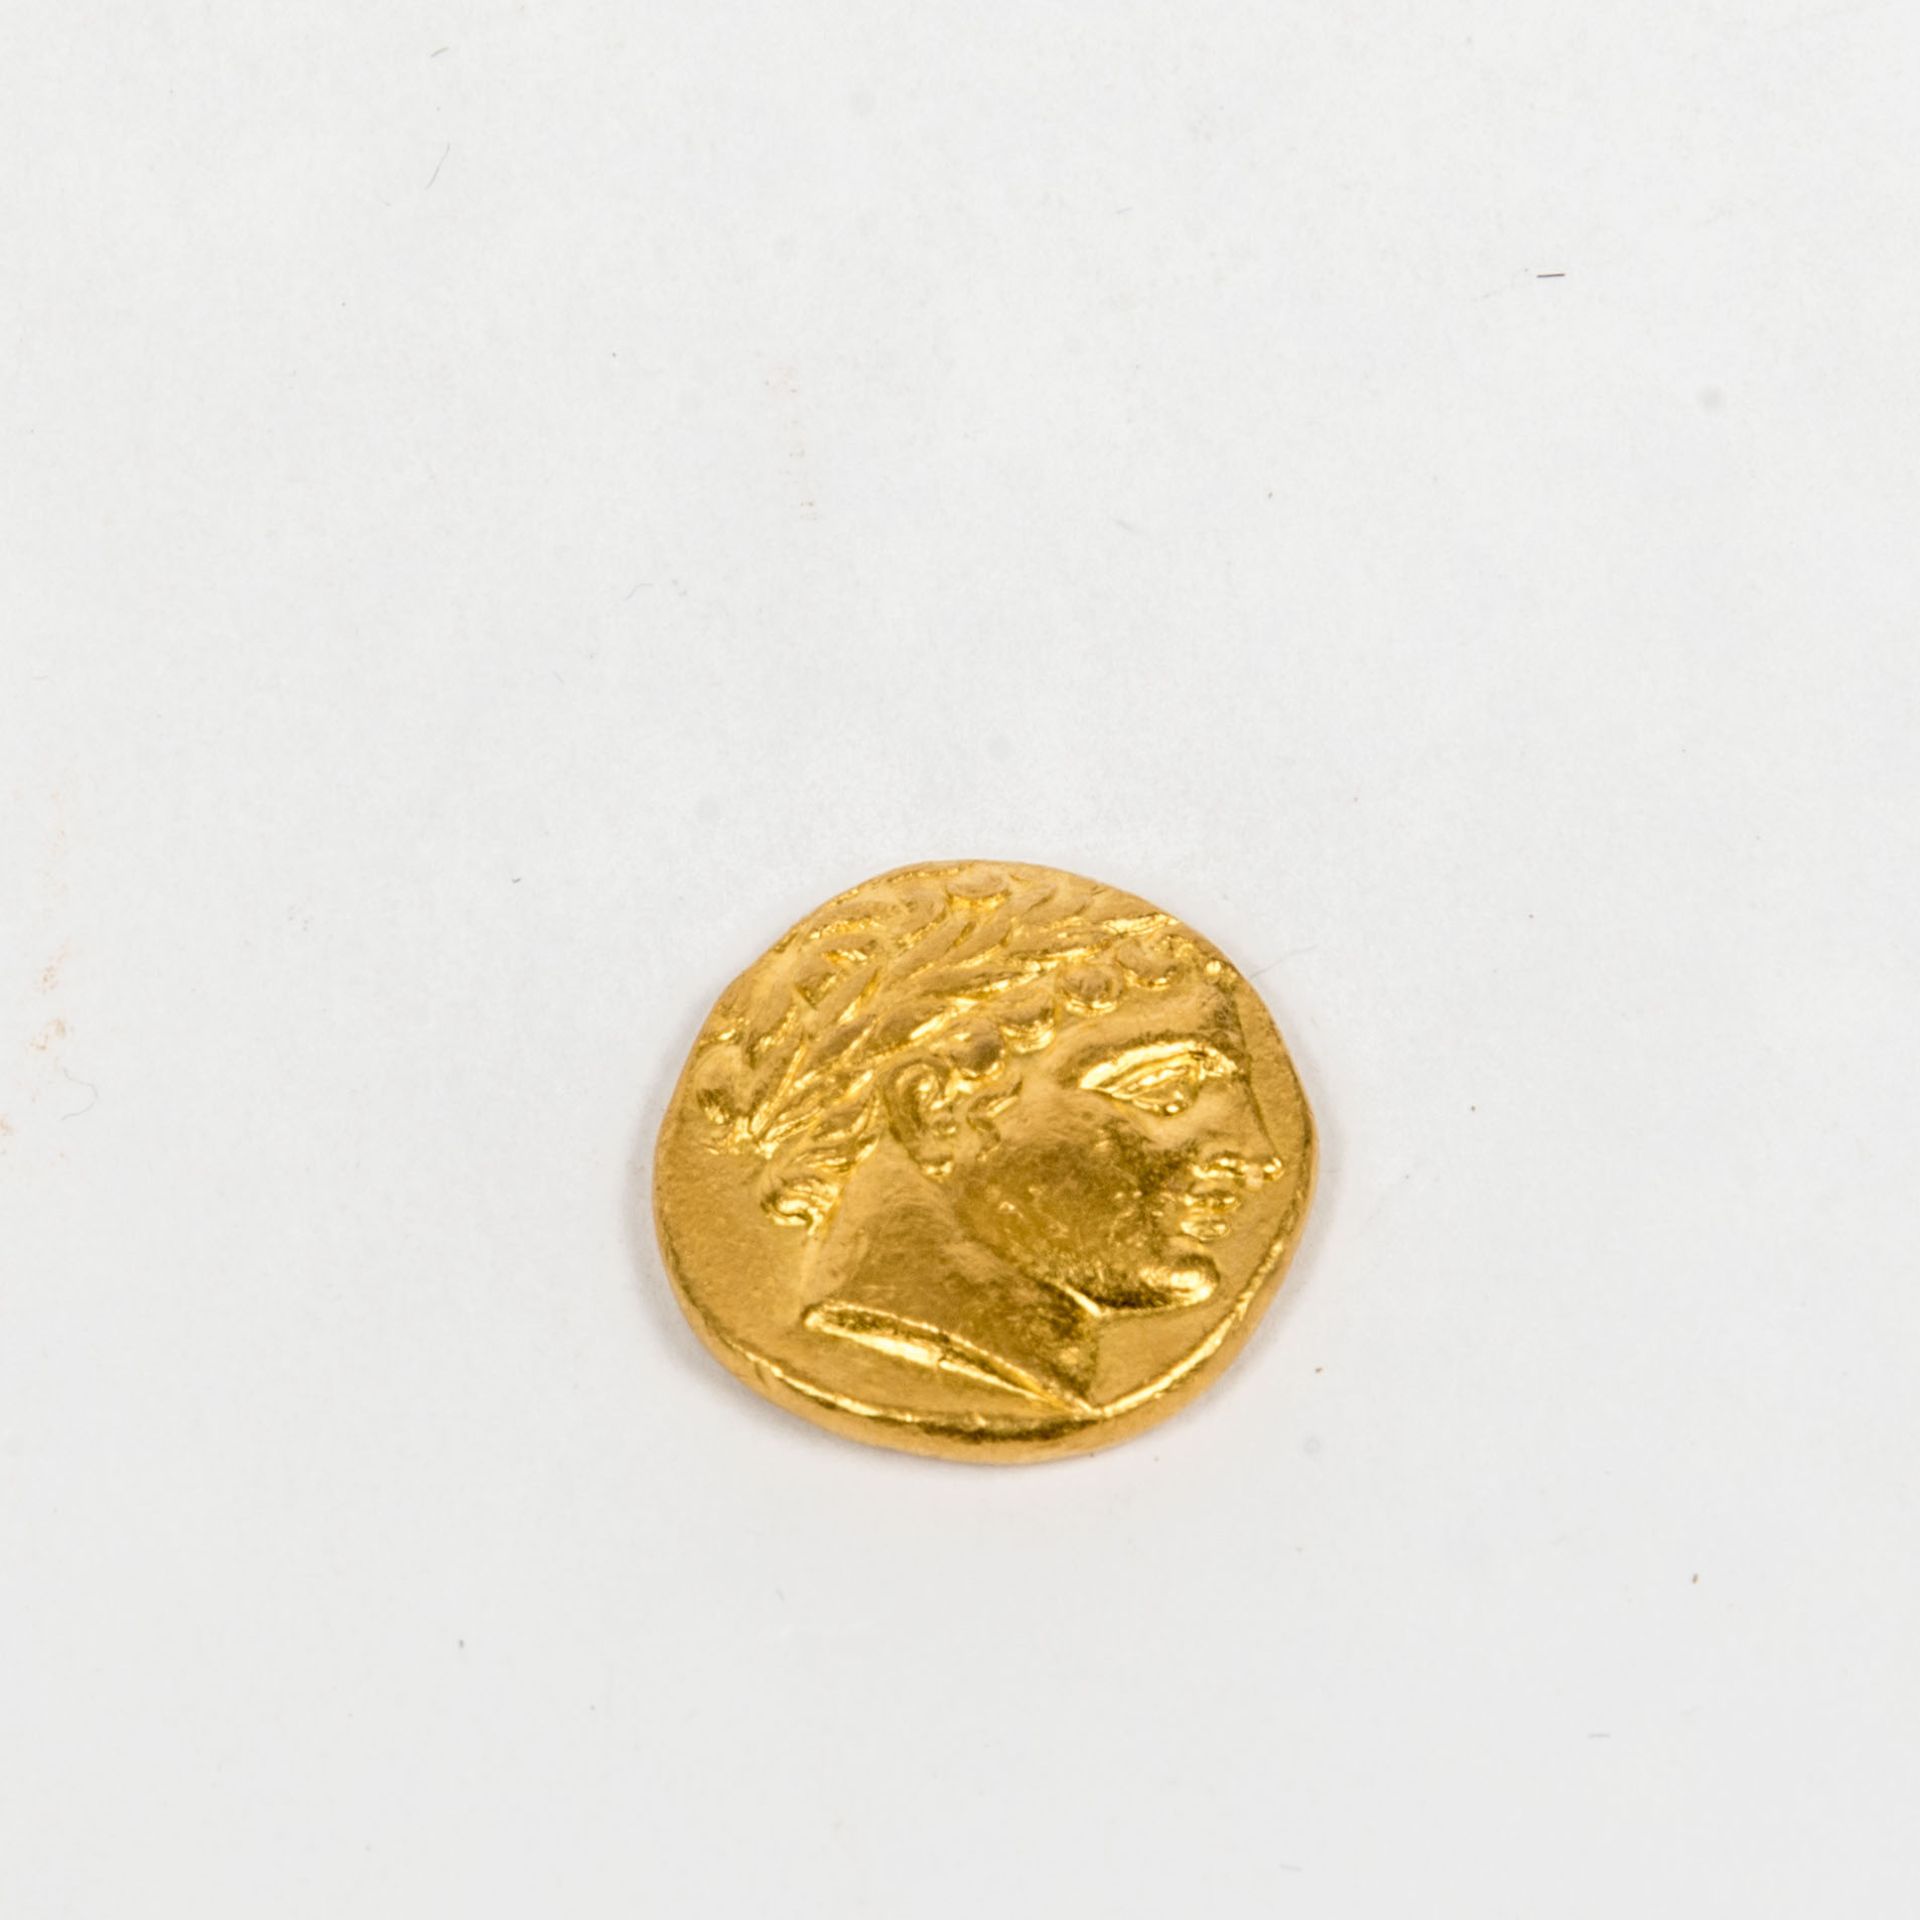 Goldstater "Philippe Macédonien" - Image 2 of 2